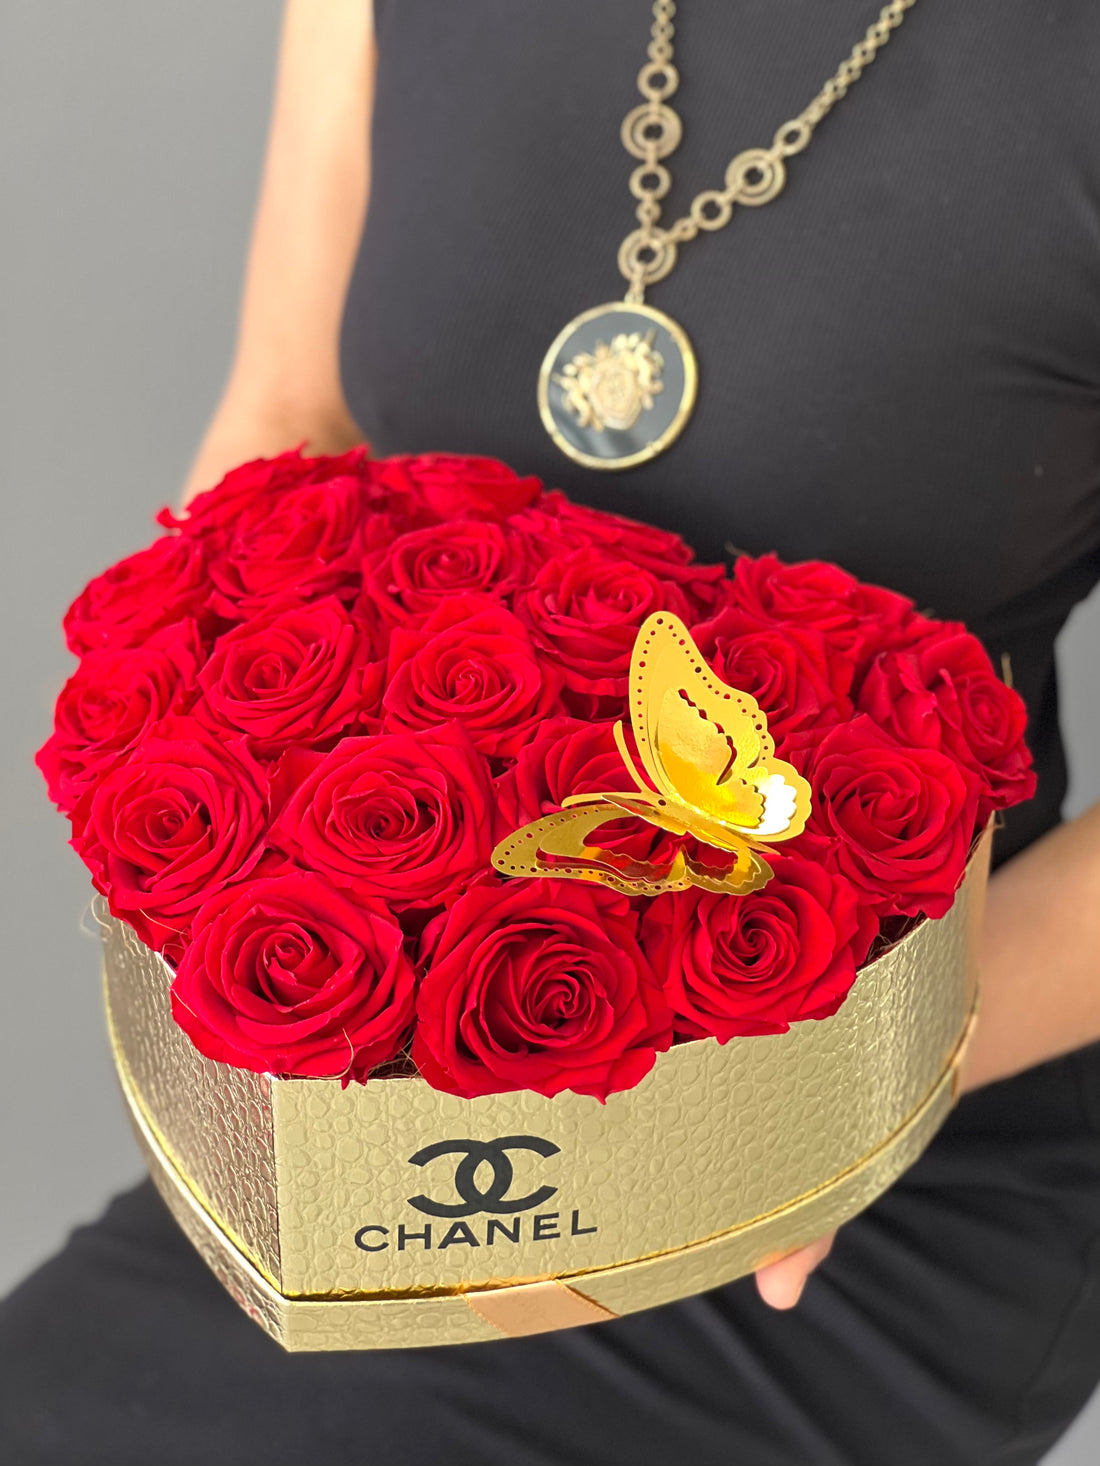 Chanel Gold Heart Rose Box: Preserved Roses